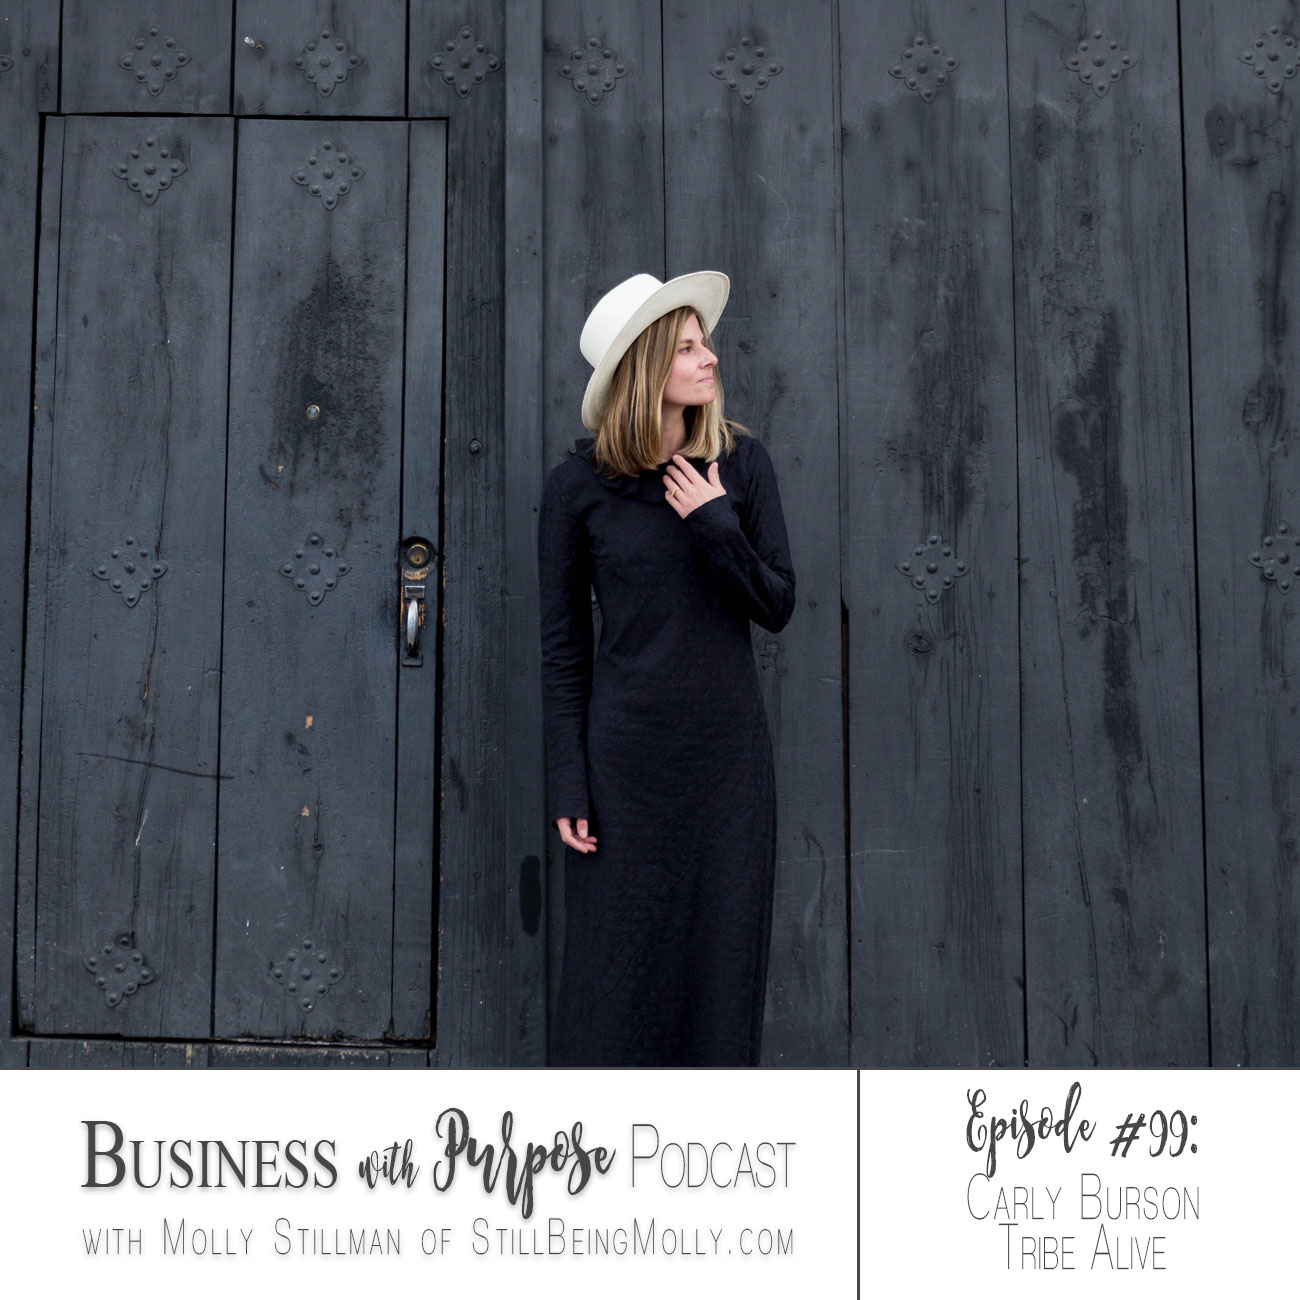 Business with Purpose Podcast EP 99: Carly Burson, Founder & CEO of Tribe Alive